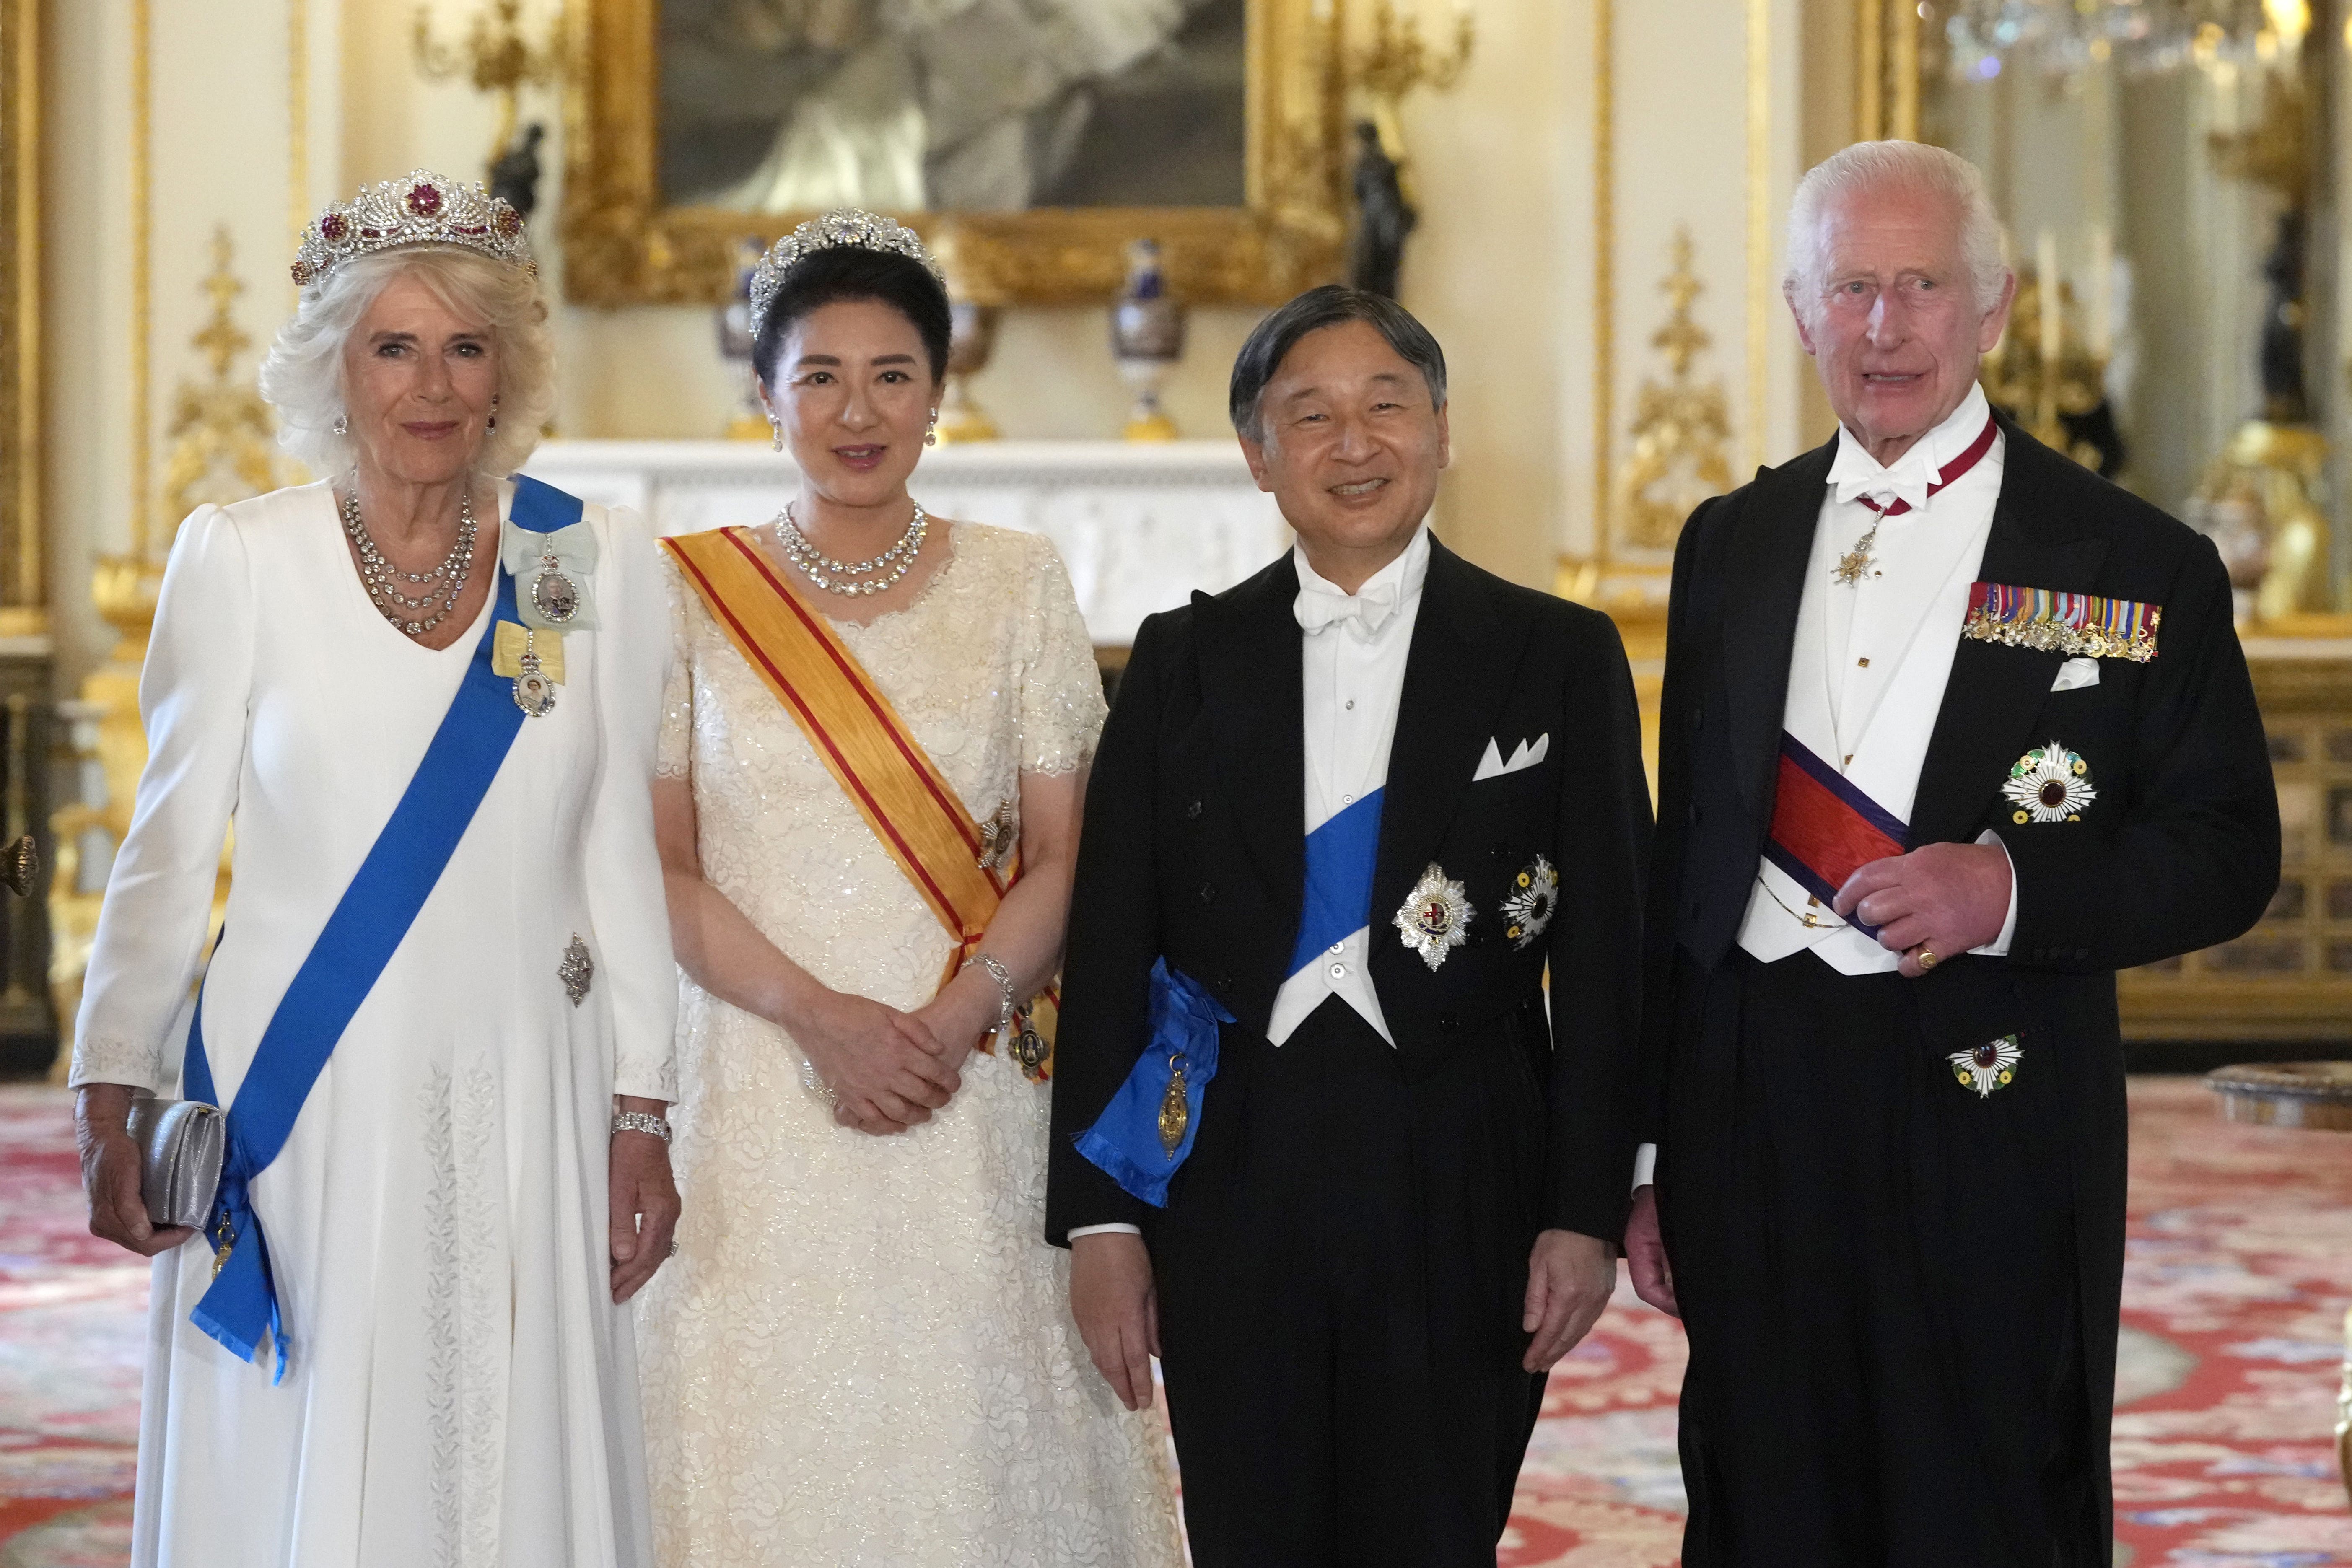 royal family, king charles iii, japan, buckingham palace, behind-the-scenes look at buckingham palace’s state banquet with gold cutlery and vibrant flowers